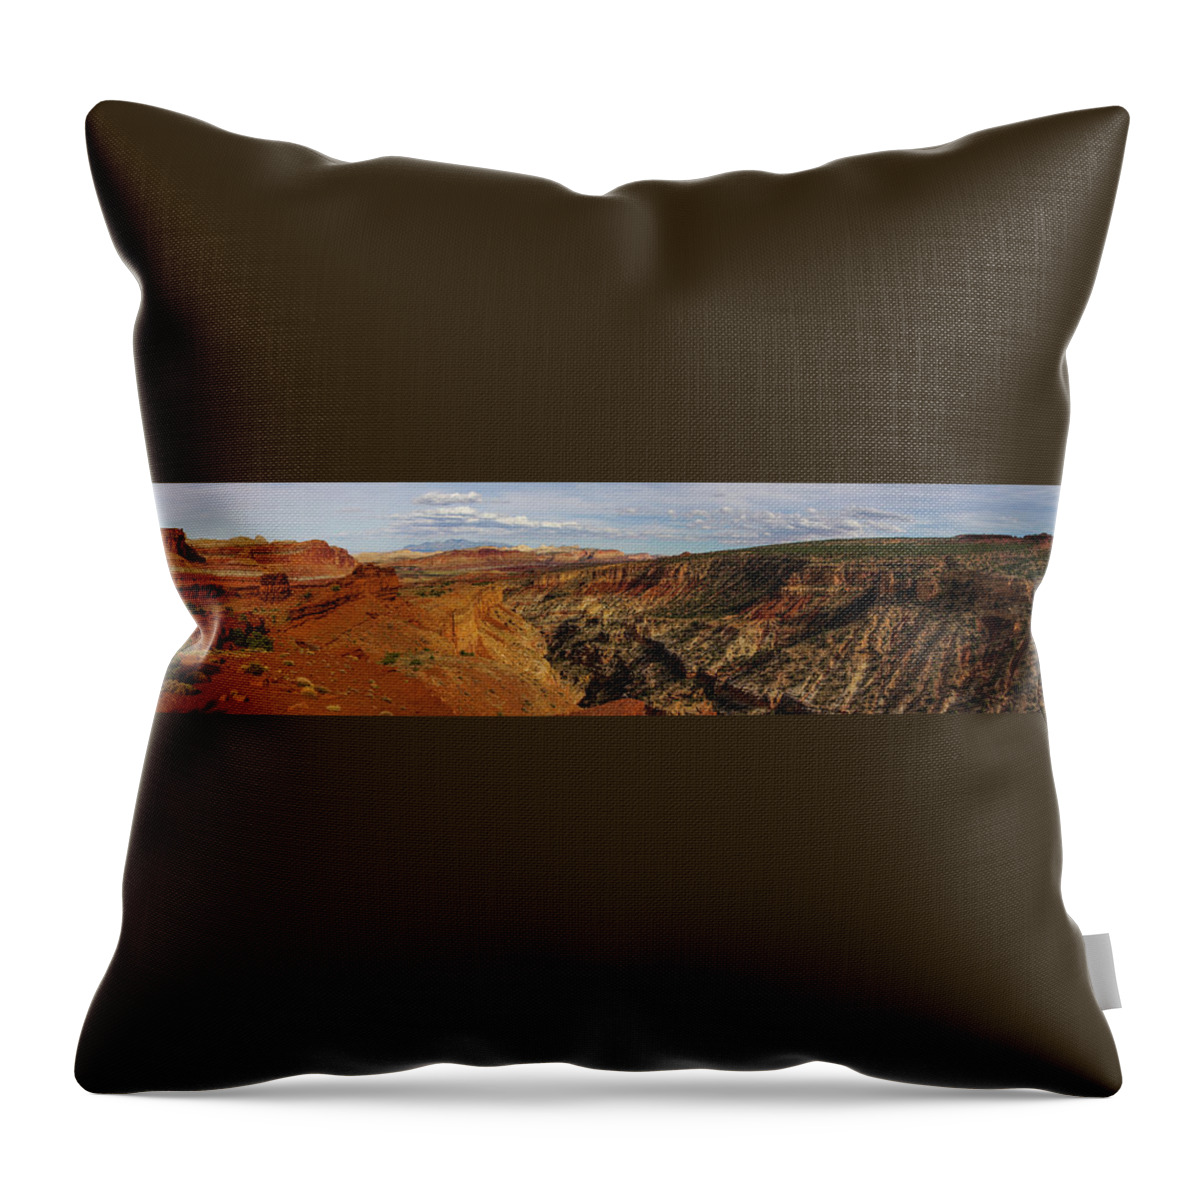 Utah Throw Pillow featuring the photograph Capitol Reef National Park Panorama by Lawrence S Richardson Jr